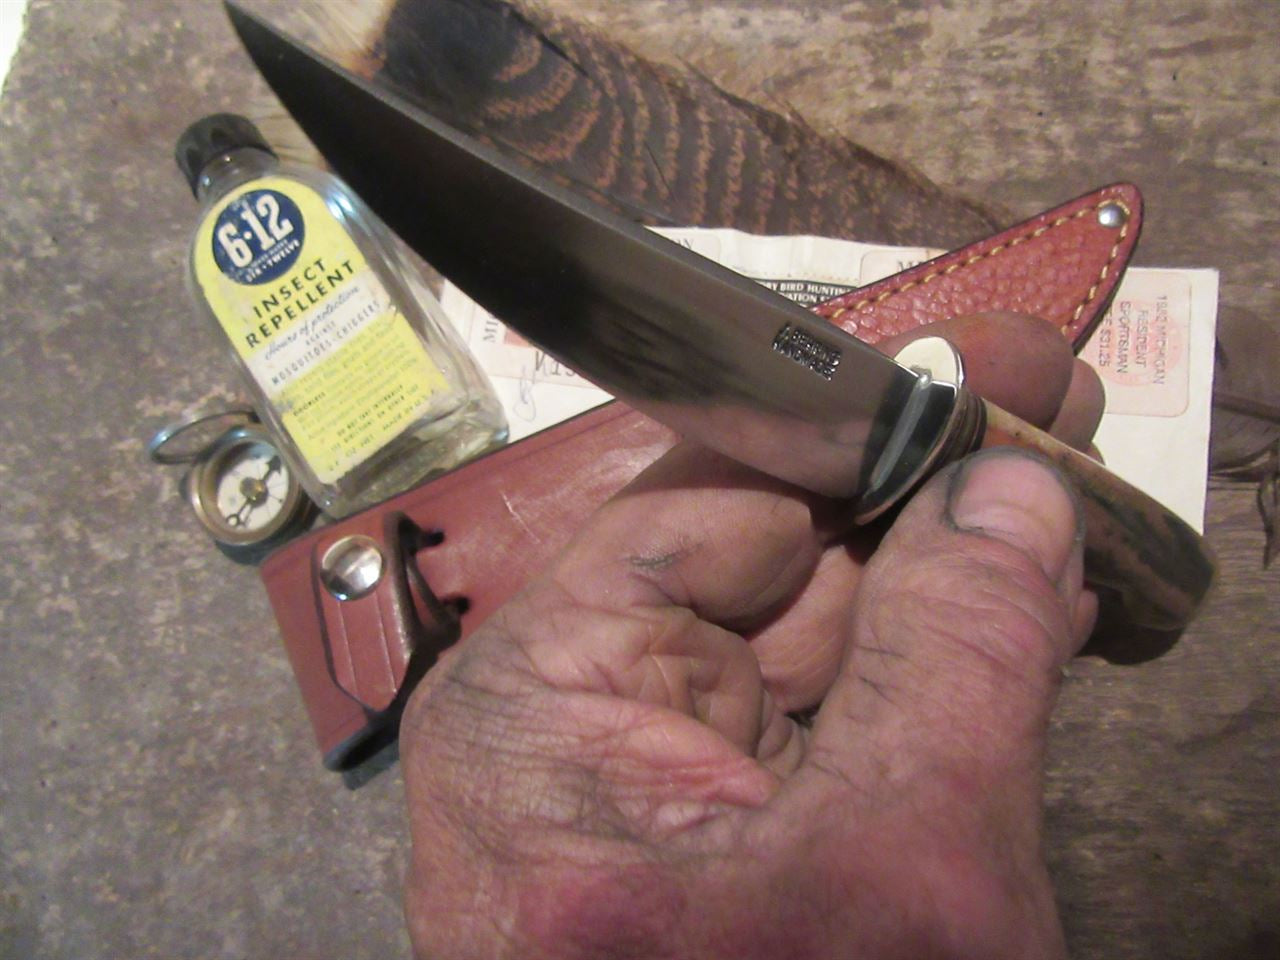 J.Behring Handmade Trout Knife 